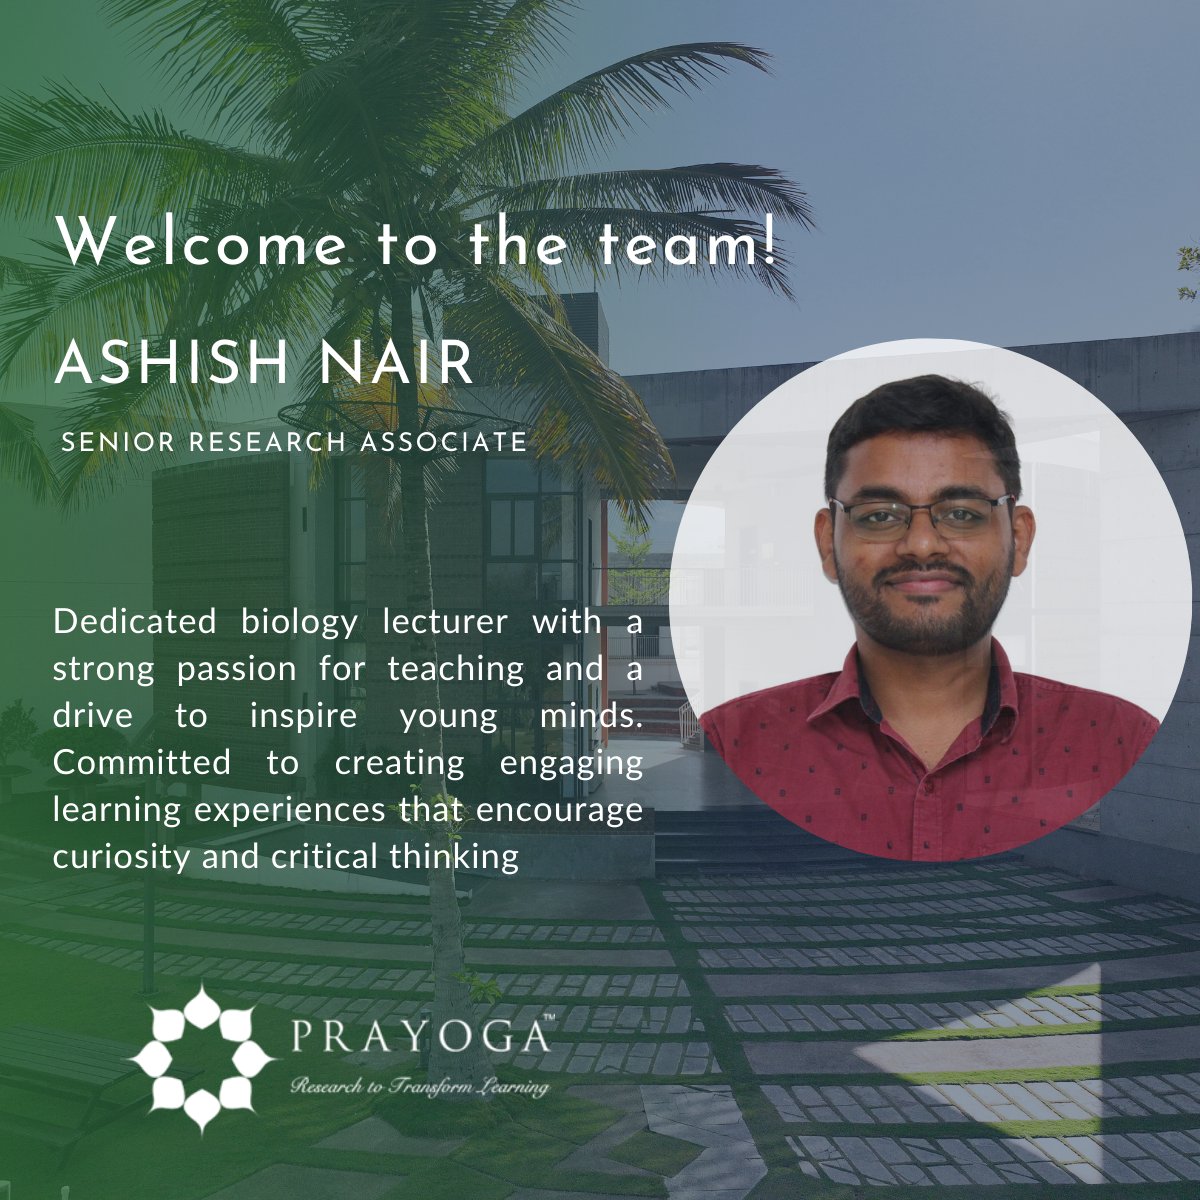 We are excited to welcome our new joiner Ashish! He adds much-needed fuel to our mission of transforming learning in India.
.
.
.
.
.
.
#experientialeducation
#teachercommunity #onboarding
#blendedlearning
#scientificresearch
#educationresearch #kriyaprogram #educationresearch